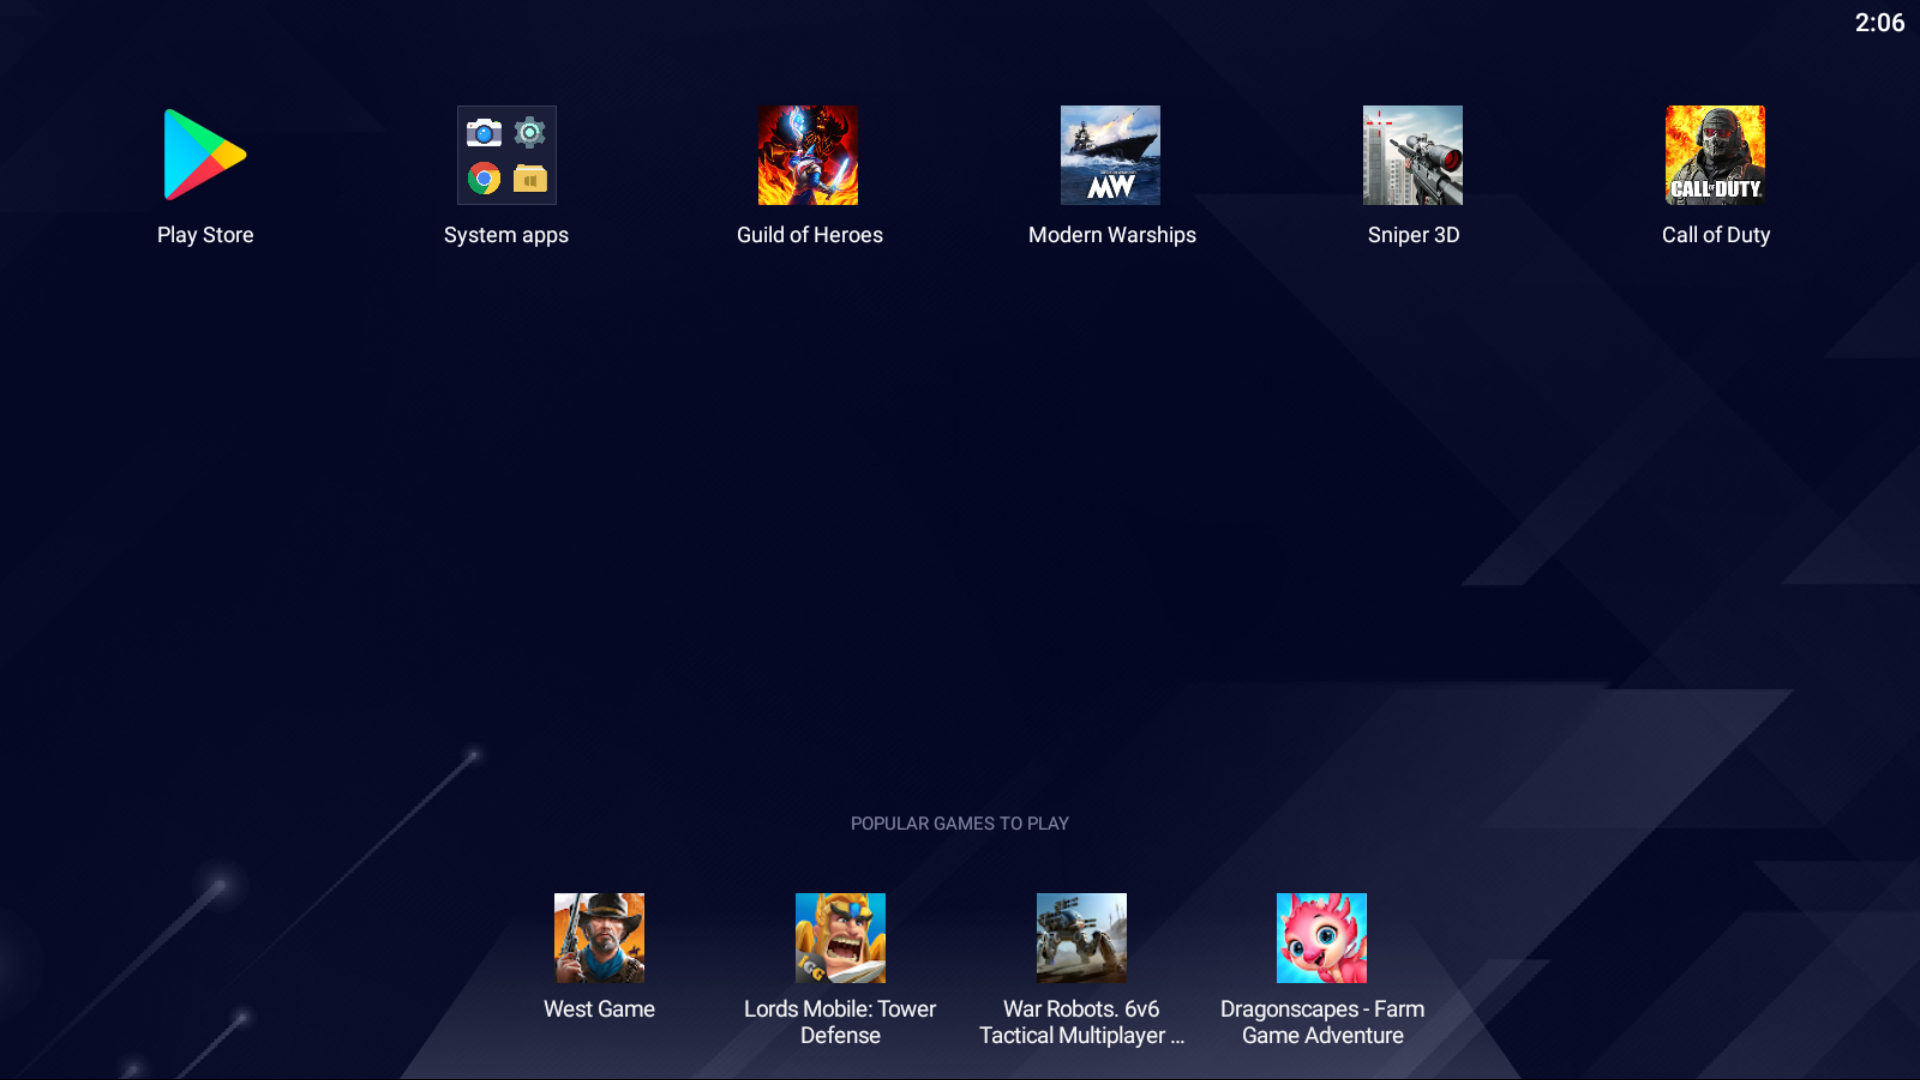 what version of android is bluestacks